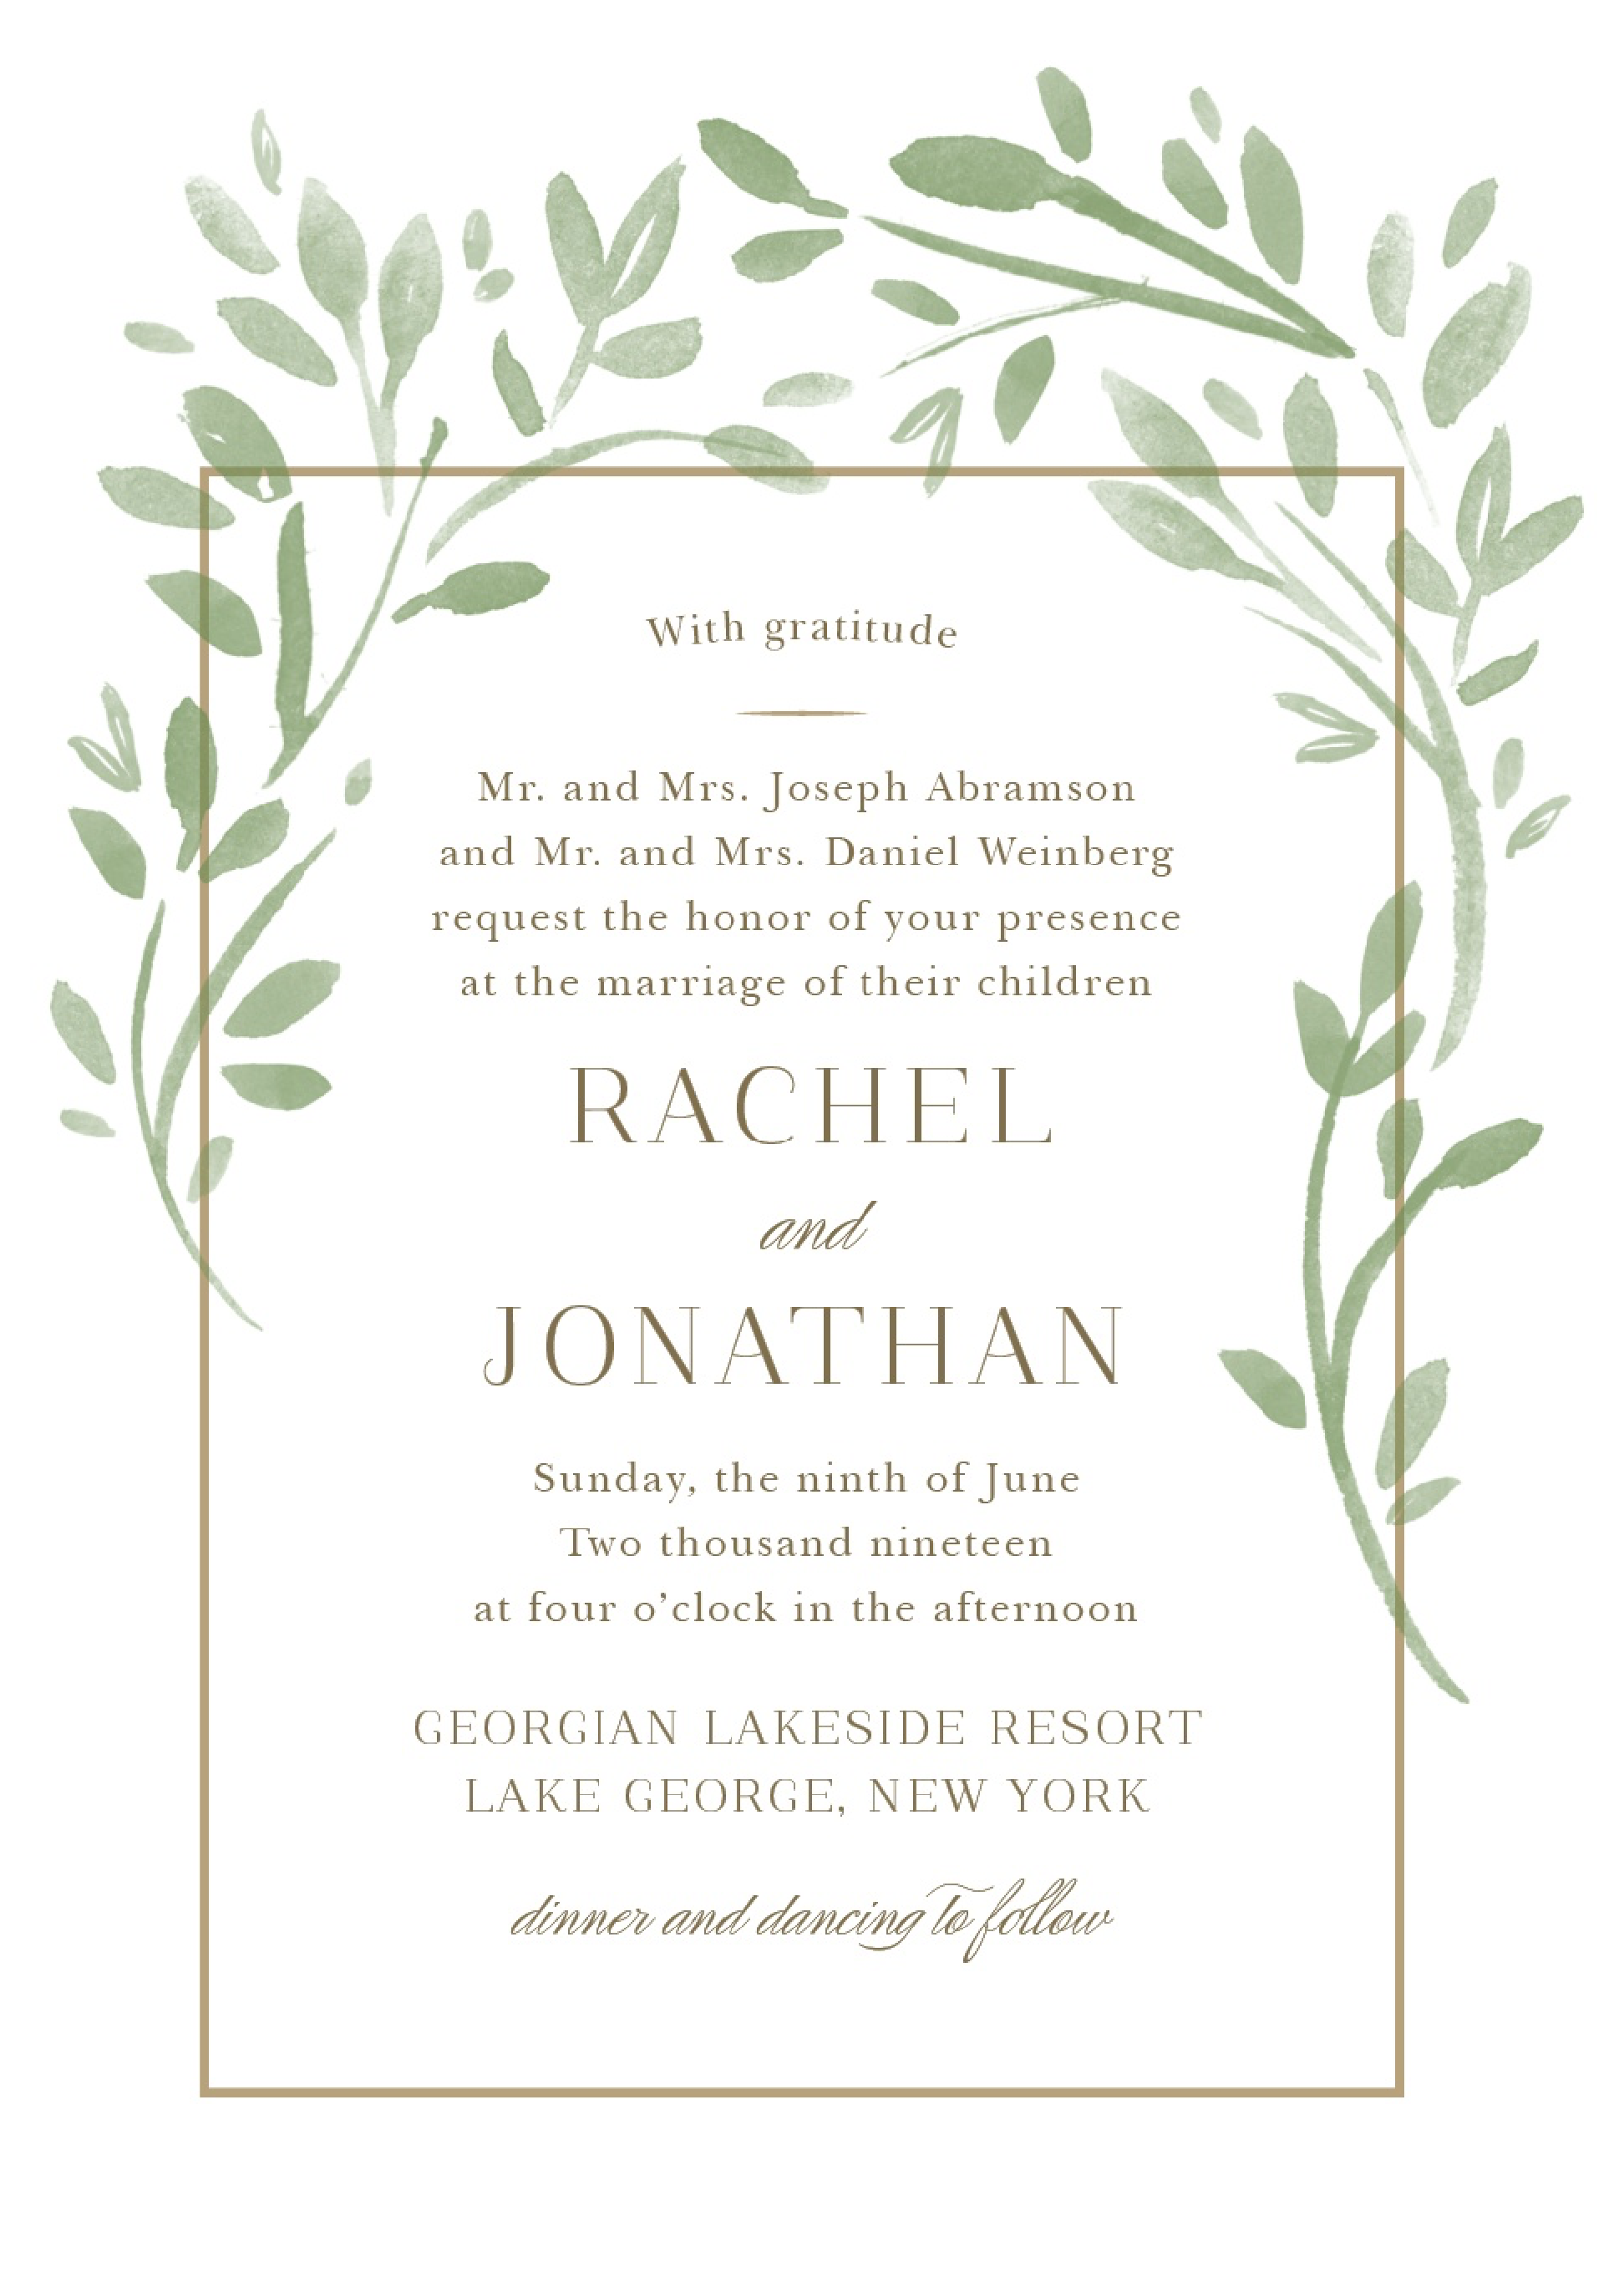 wedding invitation wording samples together with their parents